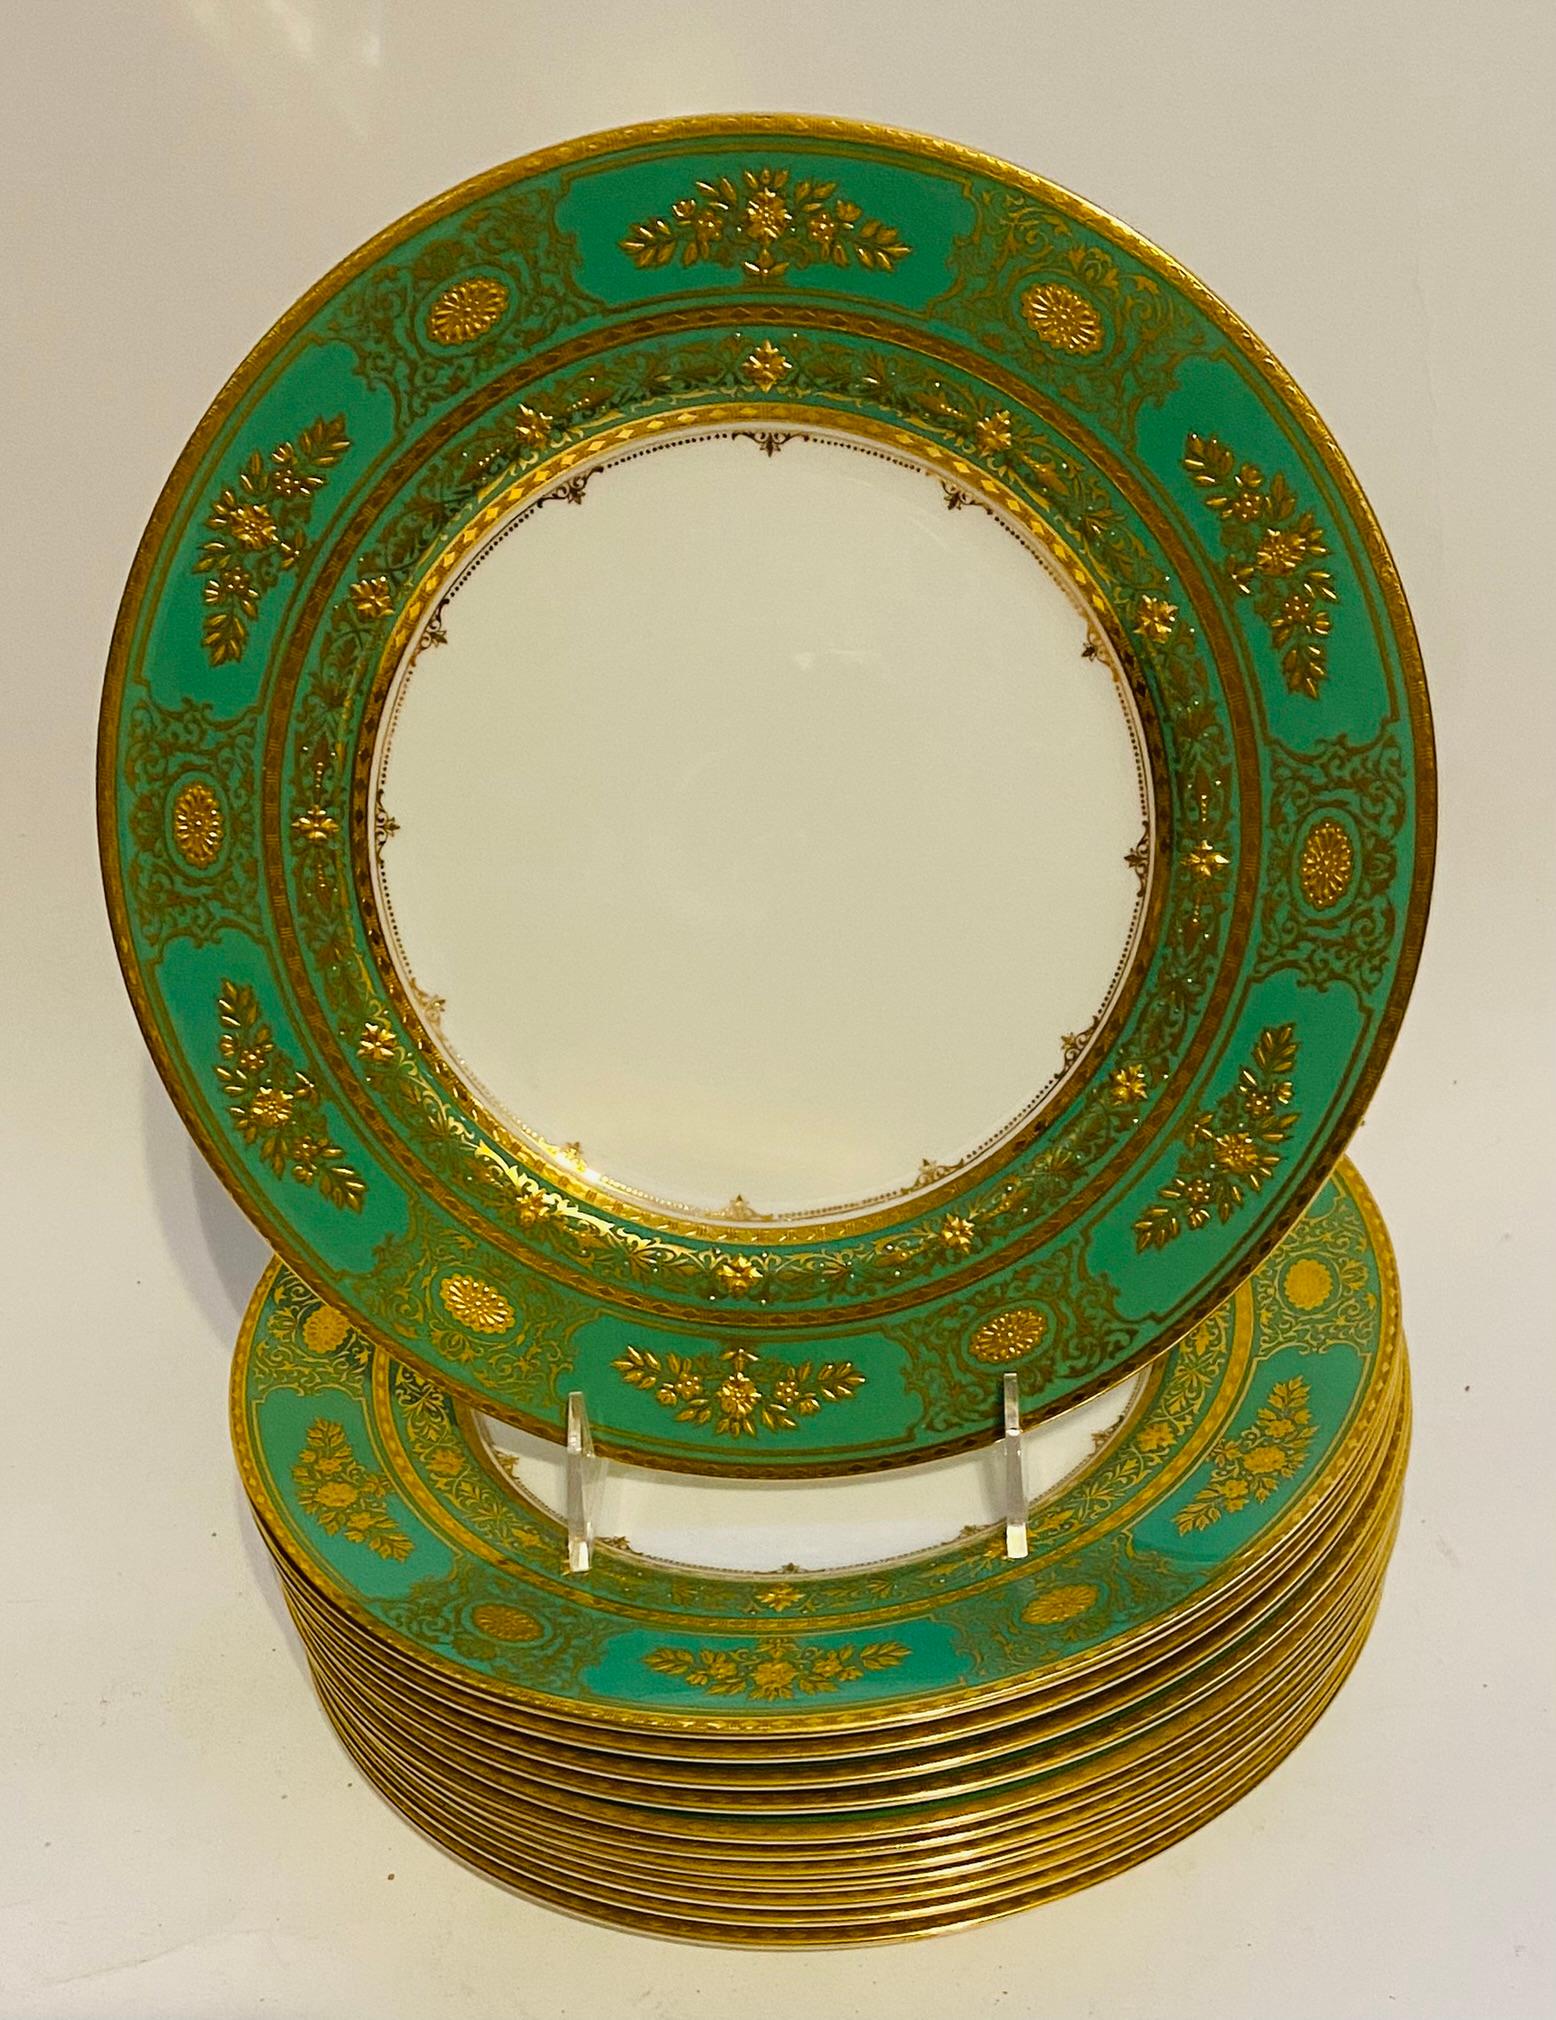 Hand-Crafted 12 Tiffany Green & Gold Encrusted Dinner Plates, Vintage Circa 1950's by Minton